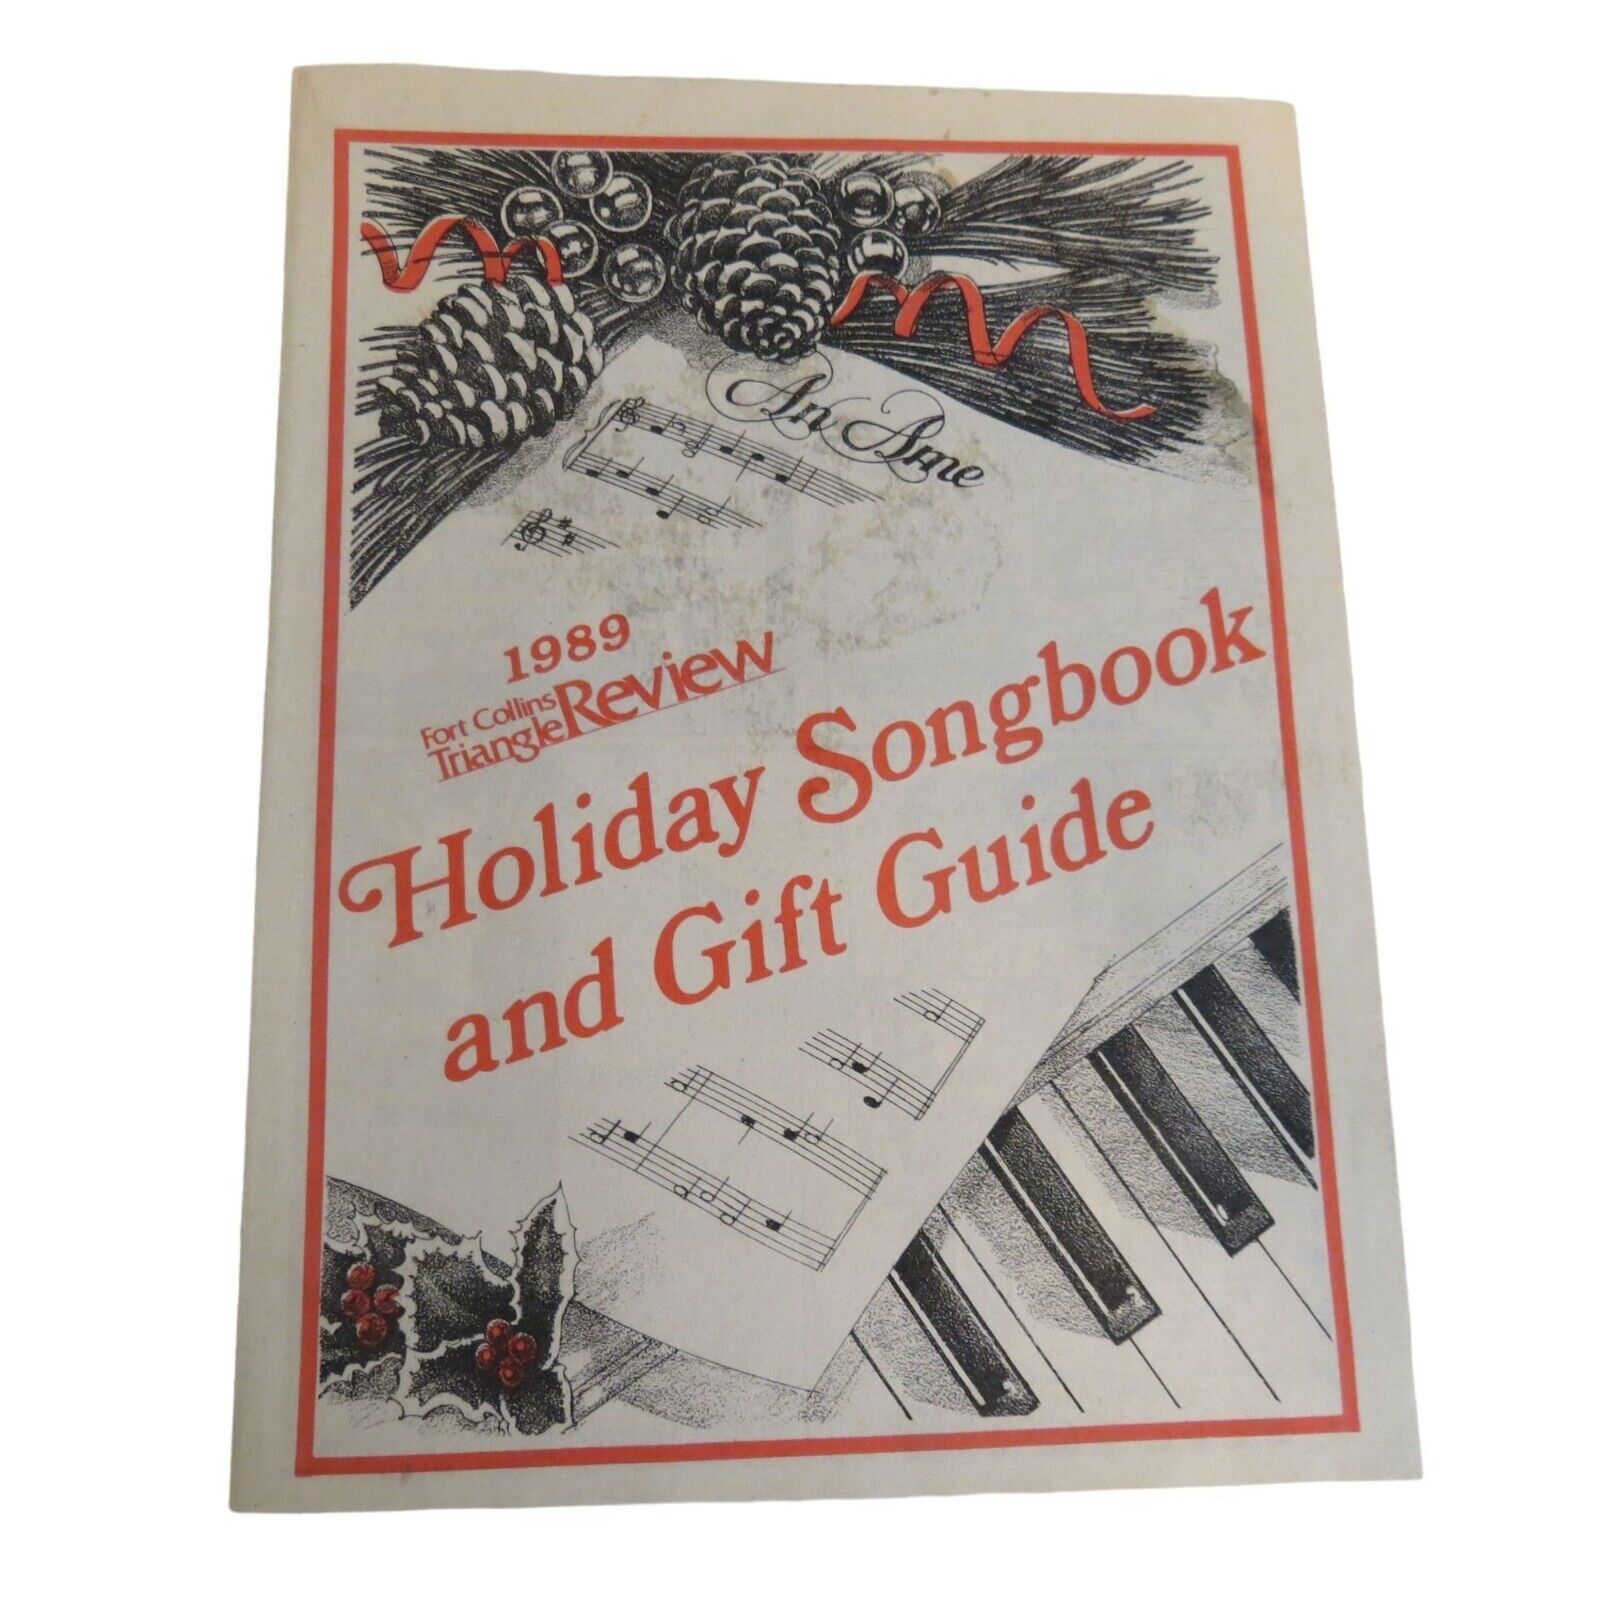 1989 Fort Collins Triangle Review Holiday Songbook & Gift Guide Colorado Advert